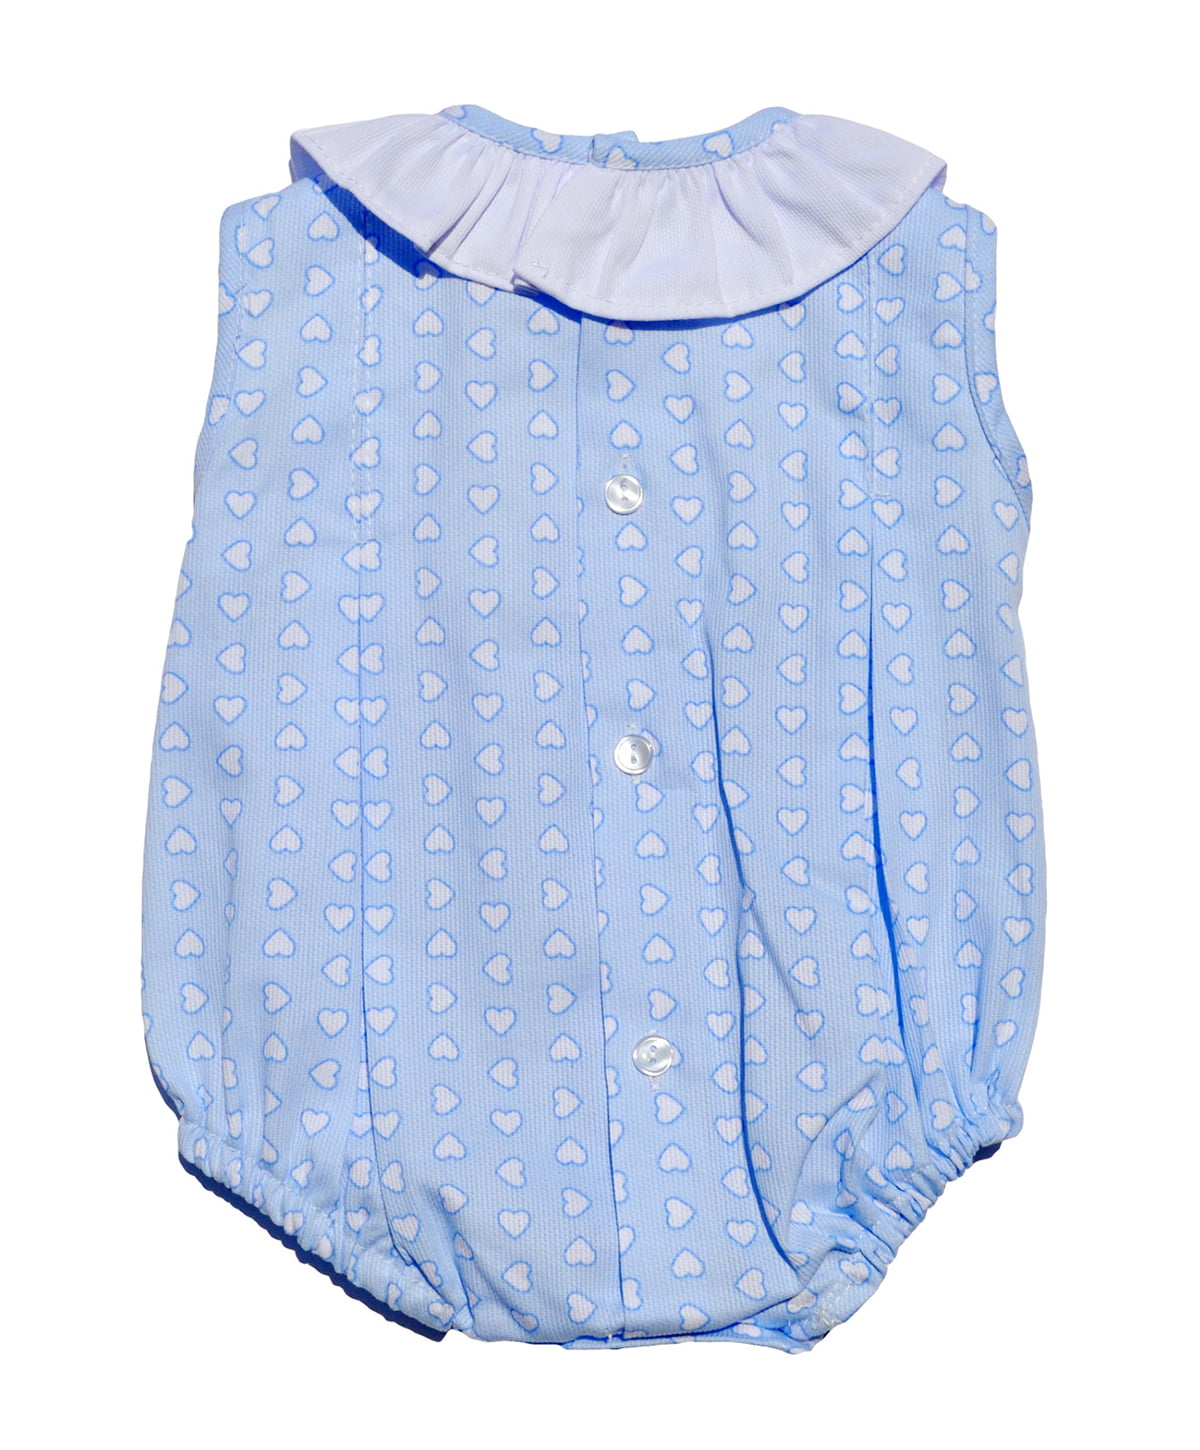 Shop Cute Heart Printed Baby Romper: Order Yours Now!